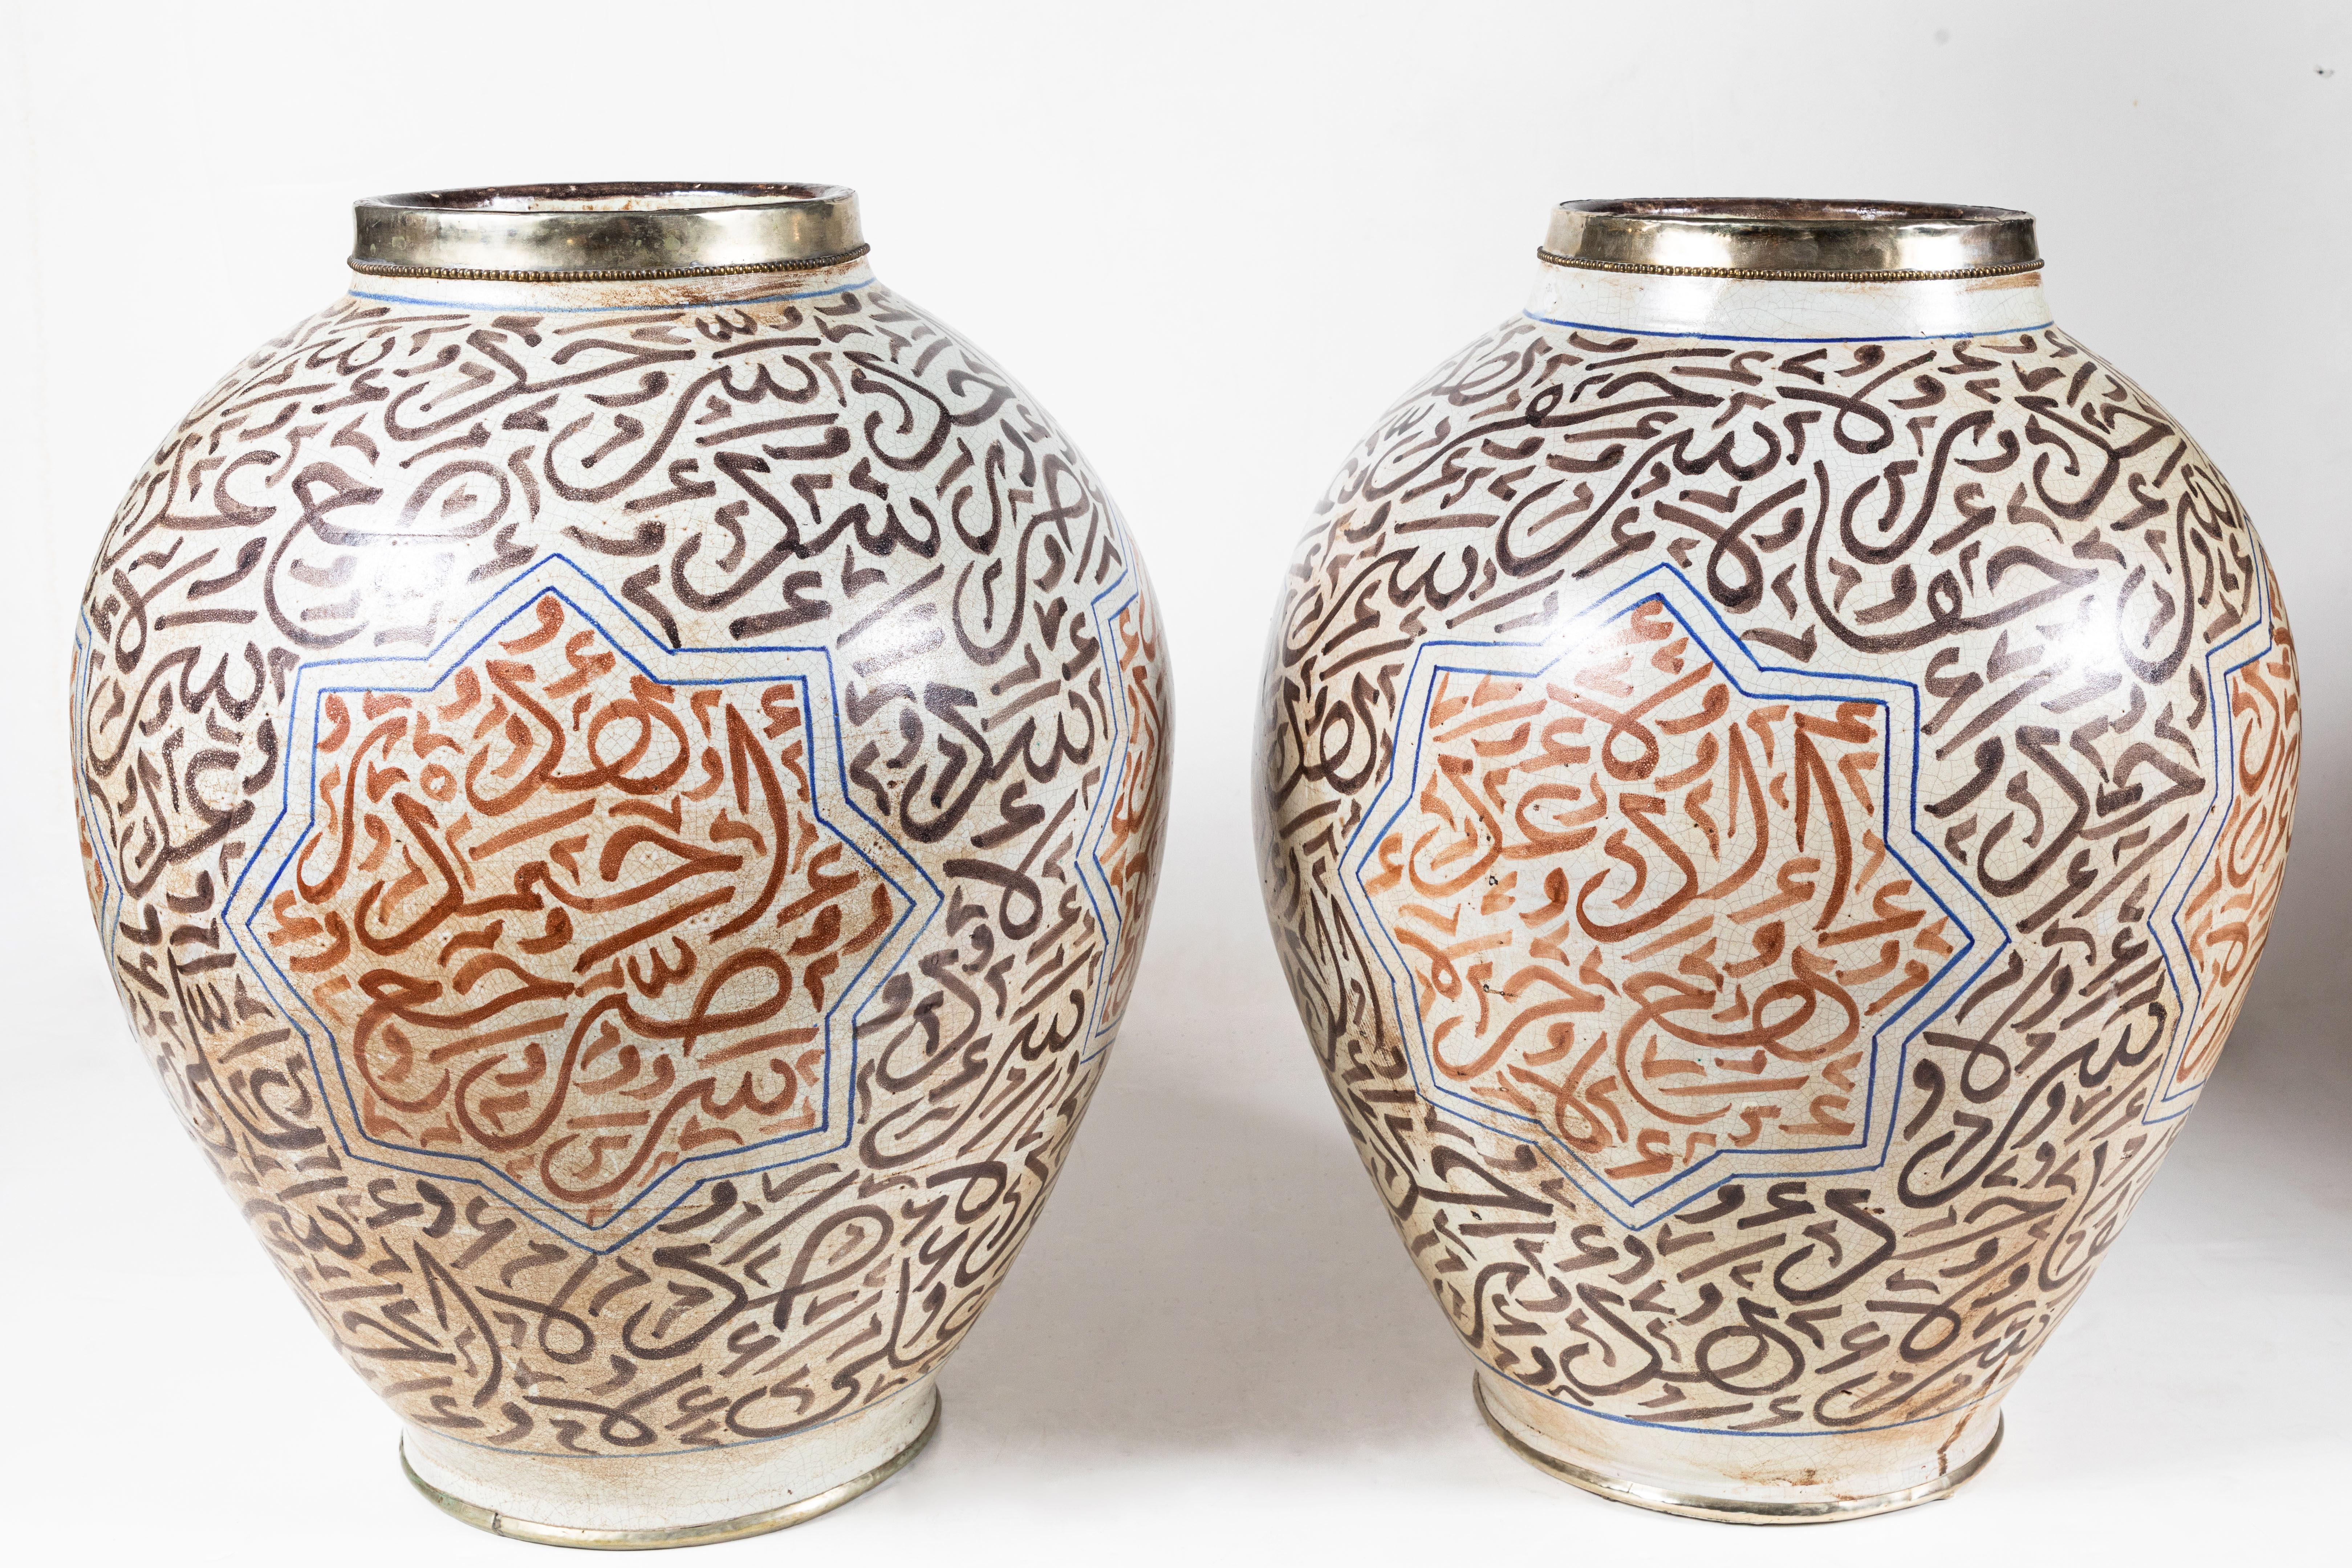 Stunning pair of rare, hand-thrown, hand painted, turn-of-the-century, lidded urns trimmed in silver. Each covered in abstracted, Arabic writing and embellished with Moorish stars.